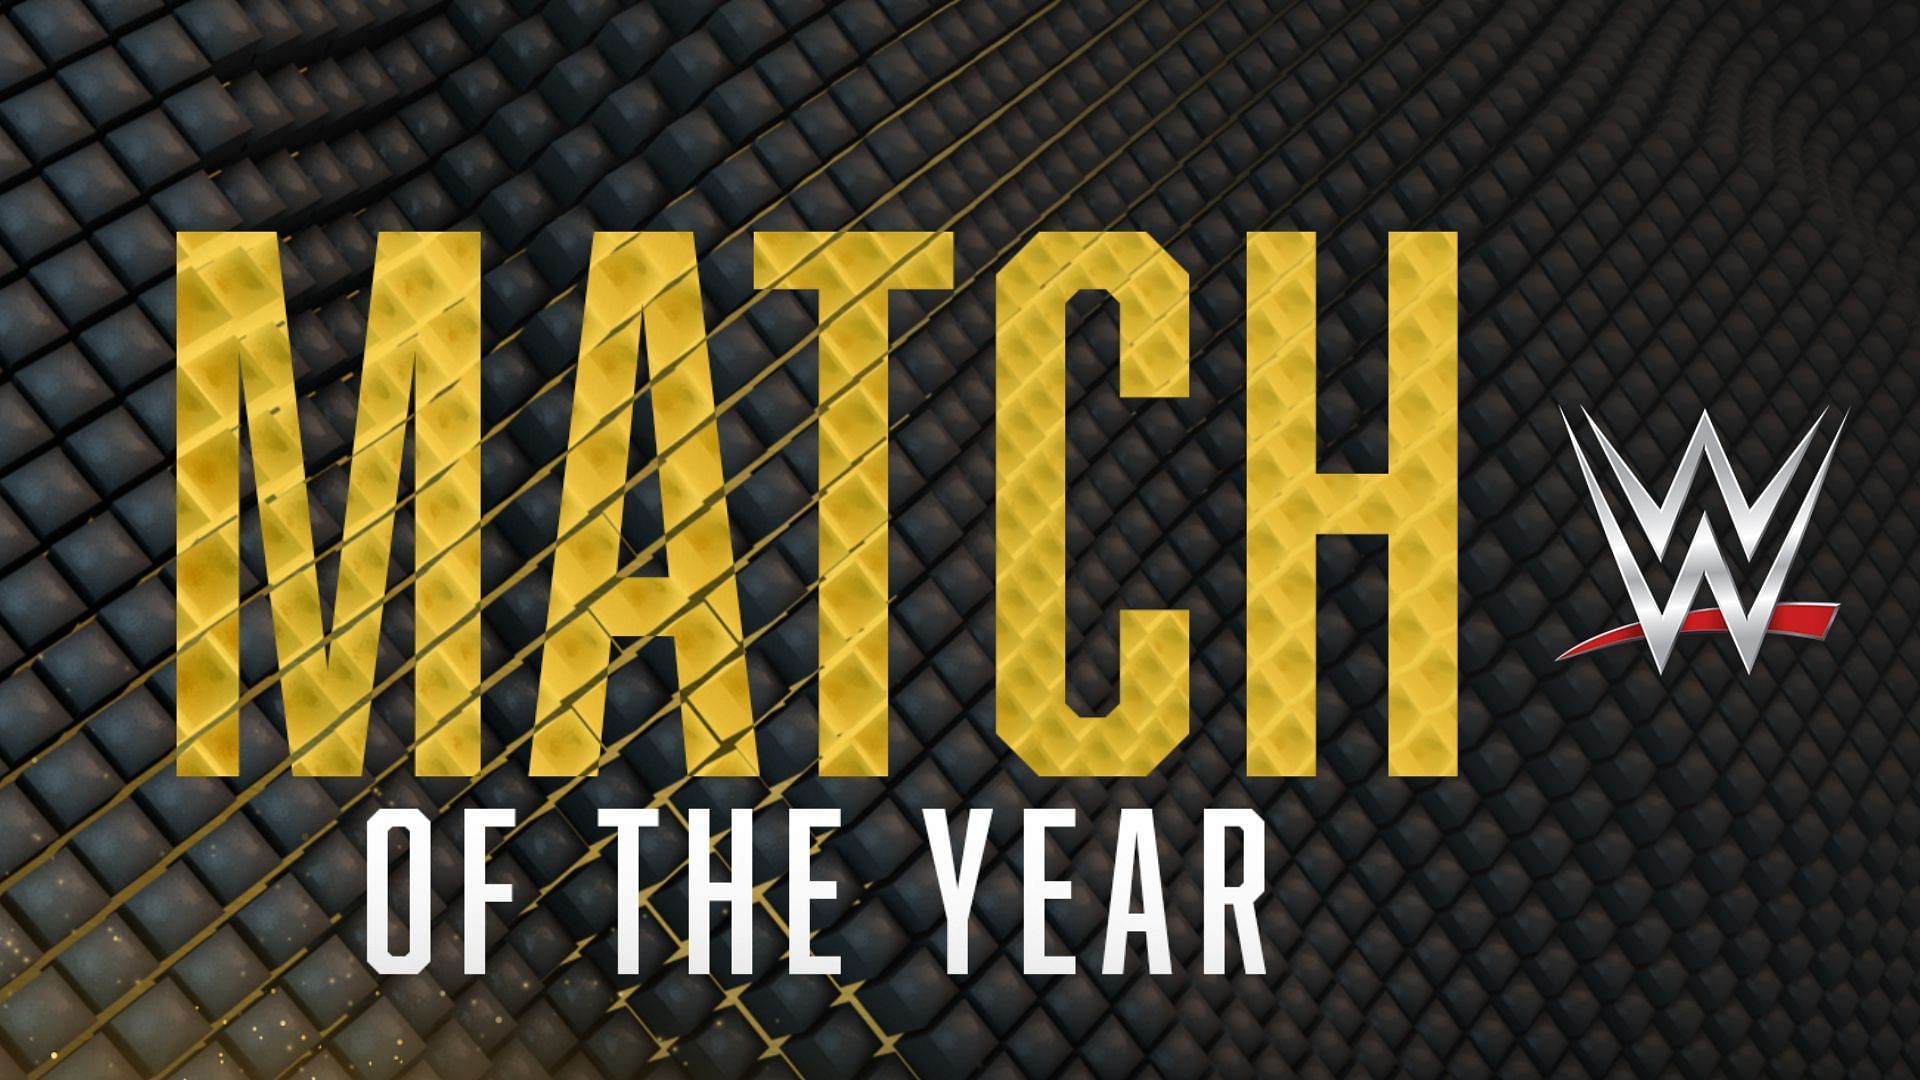 PWI Match of the Year 2022 was awarded to a WWE match